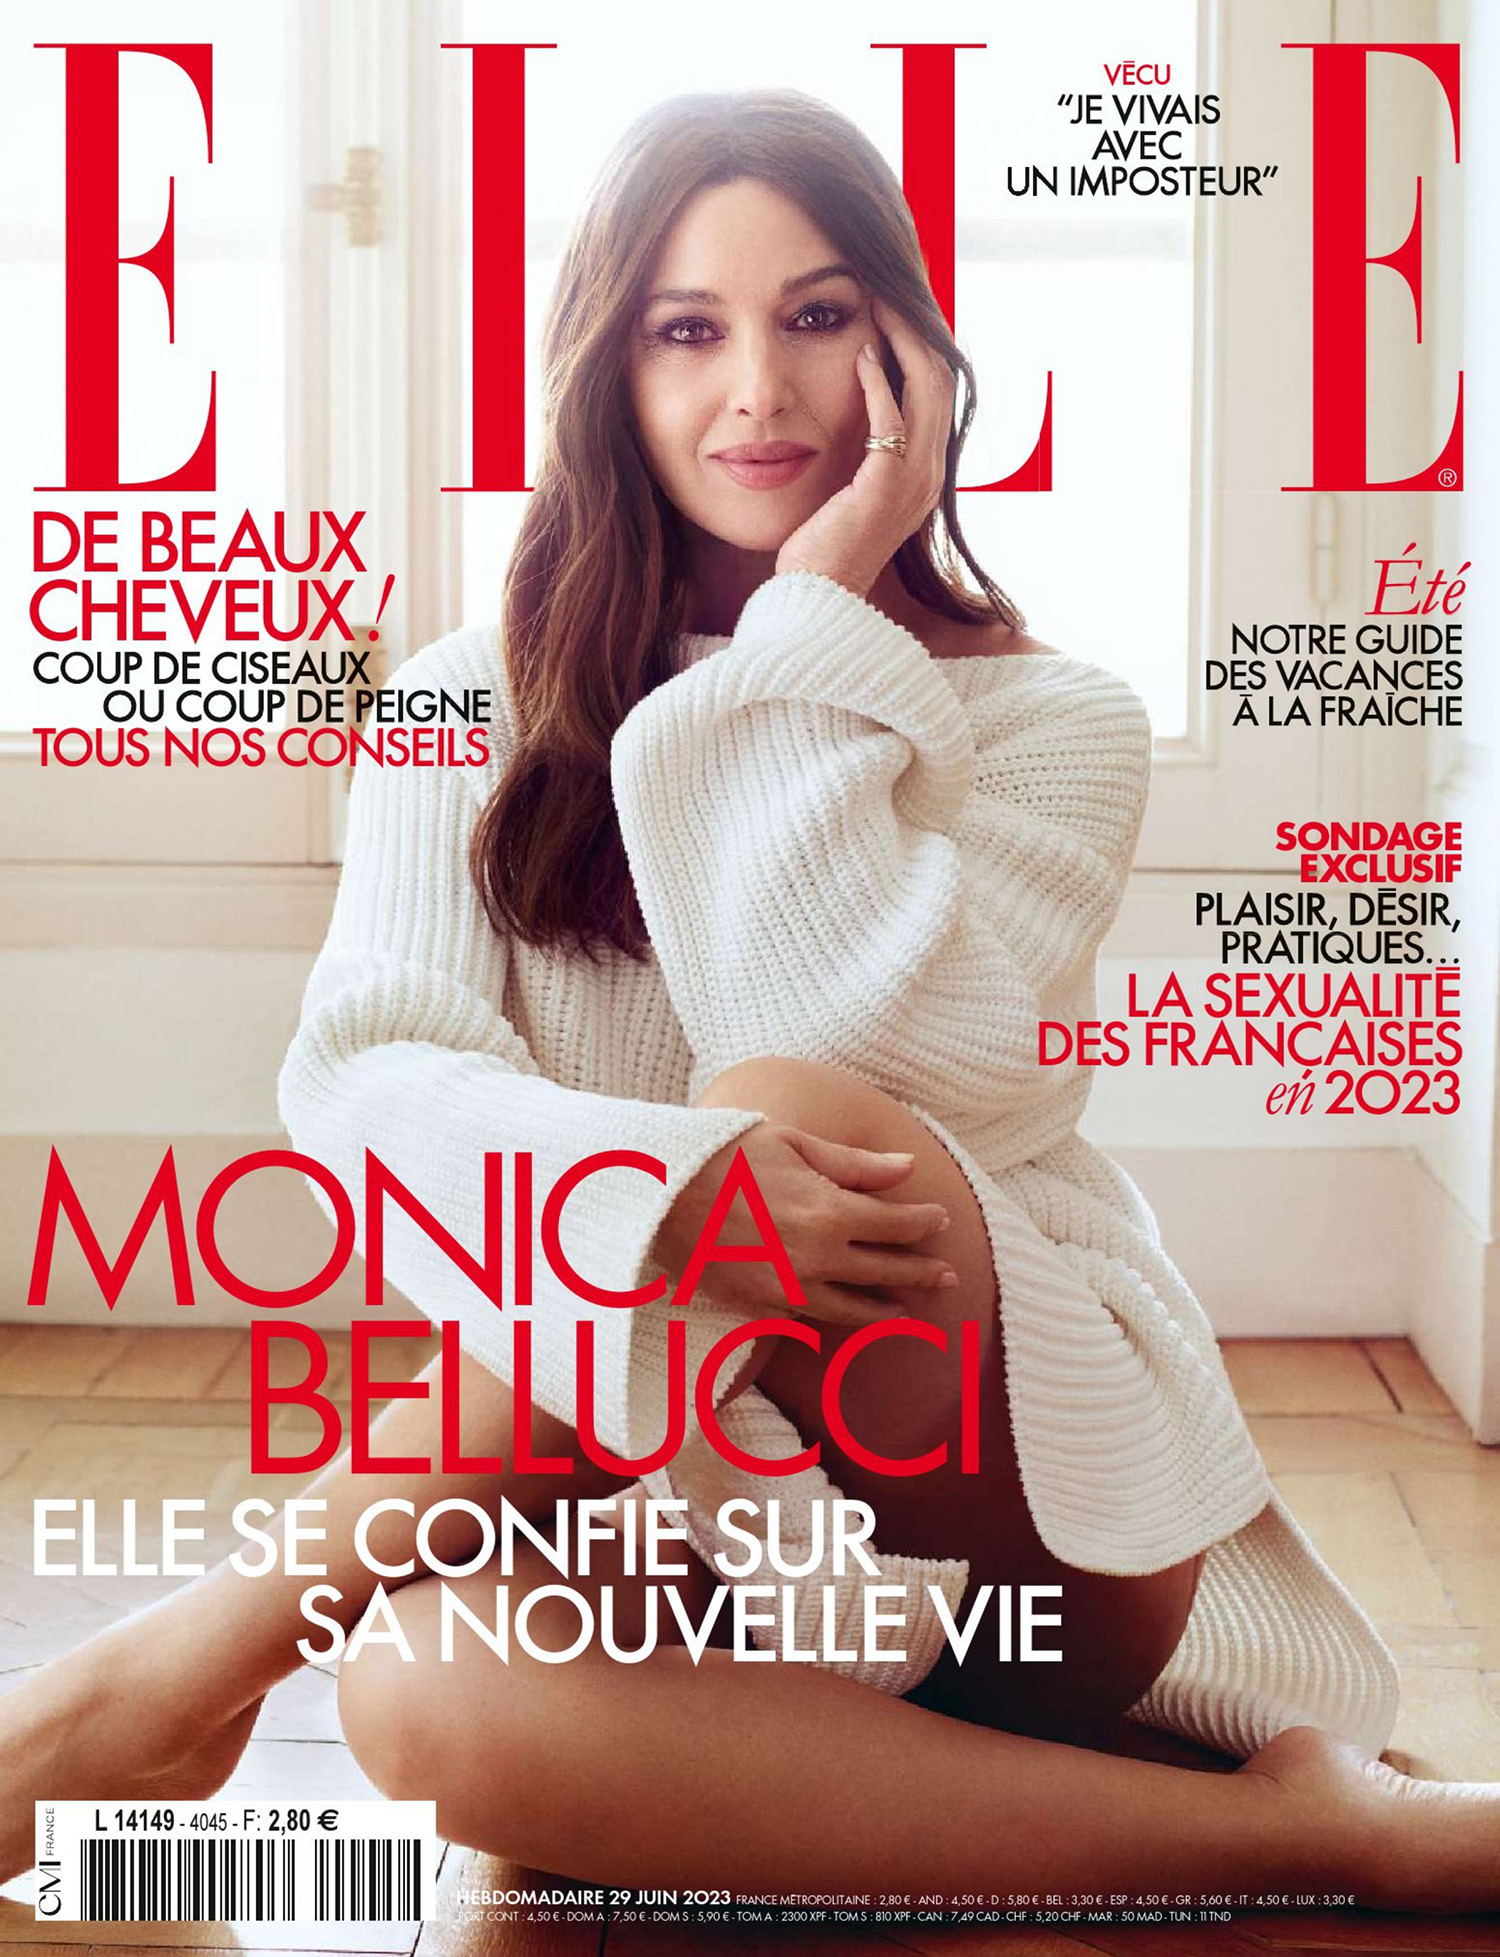 Monica Bellucci covers Elle France June 29th, 2023 by Nico Bustos